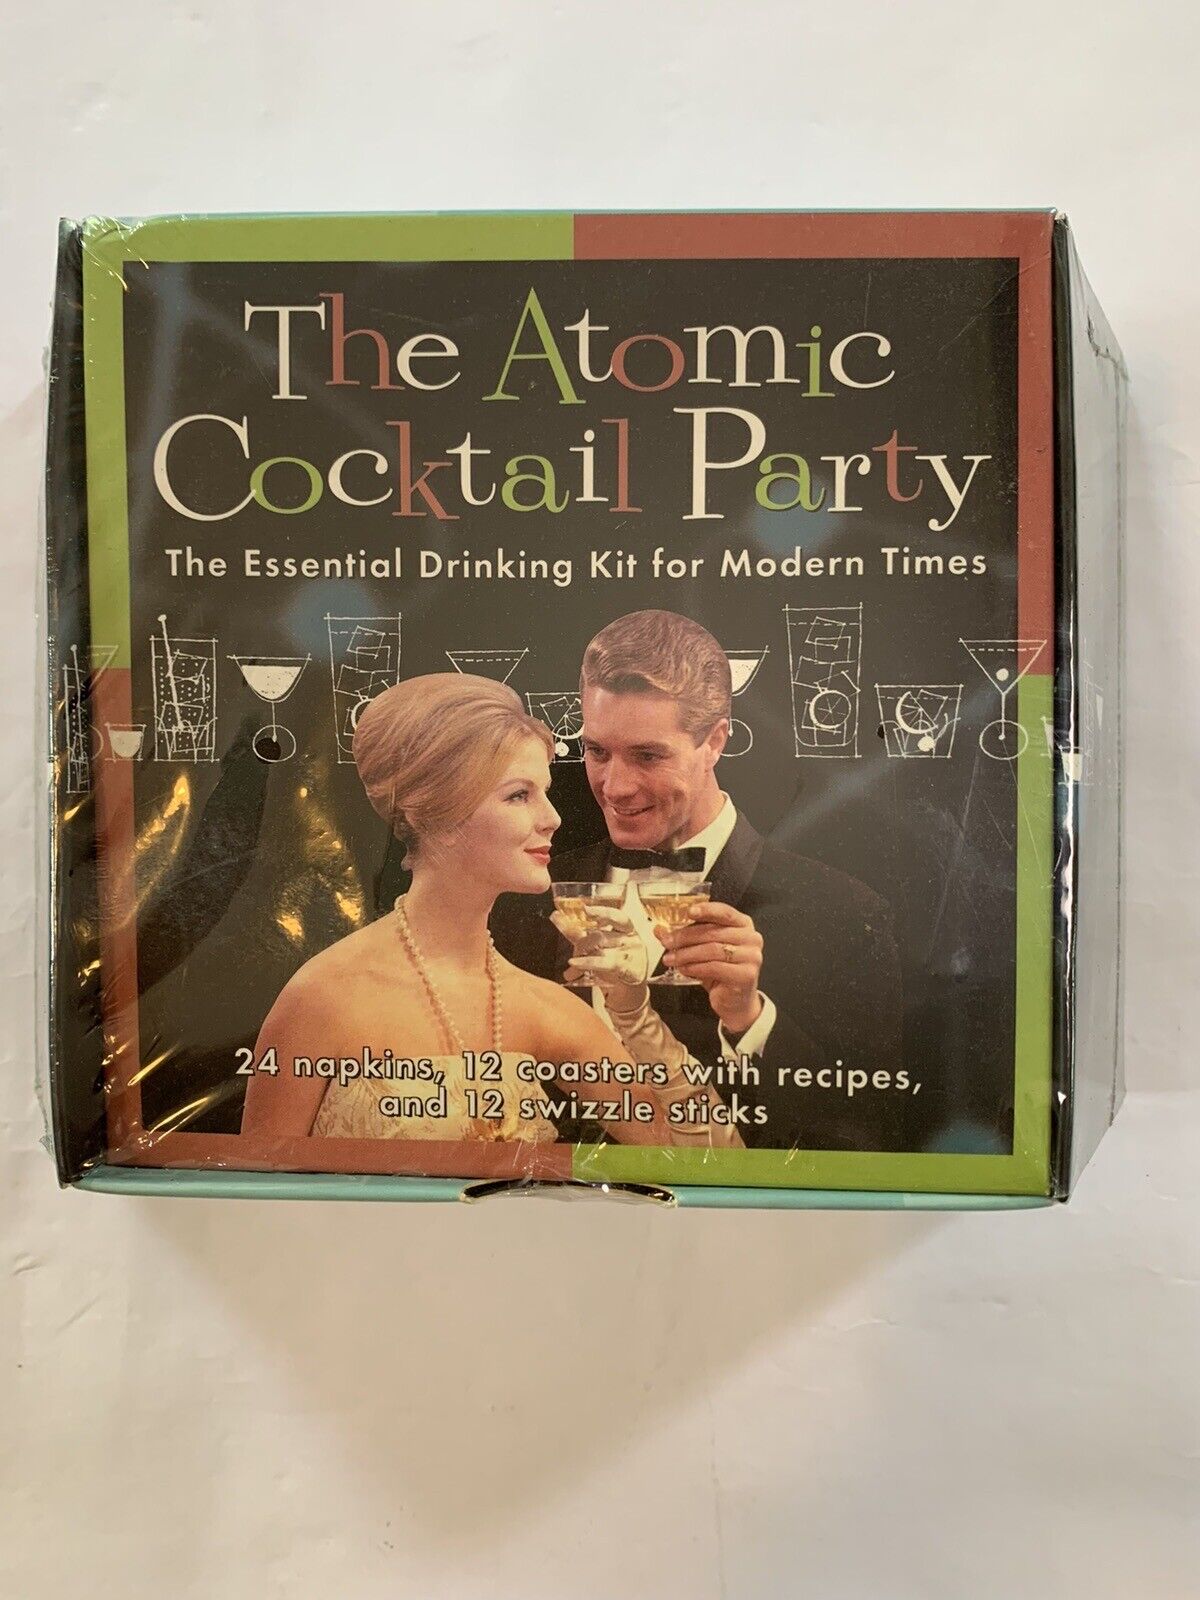 Cocktail Party Kit “The Atomic Cocktail Party”  Recipes Coasters Swizzle Retro